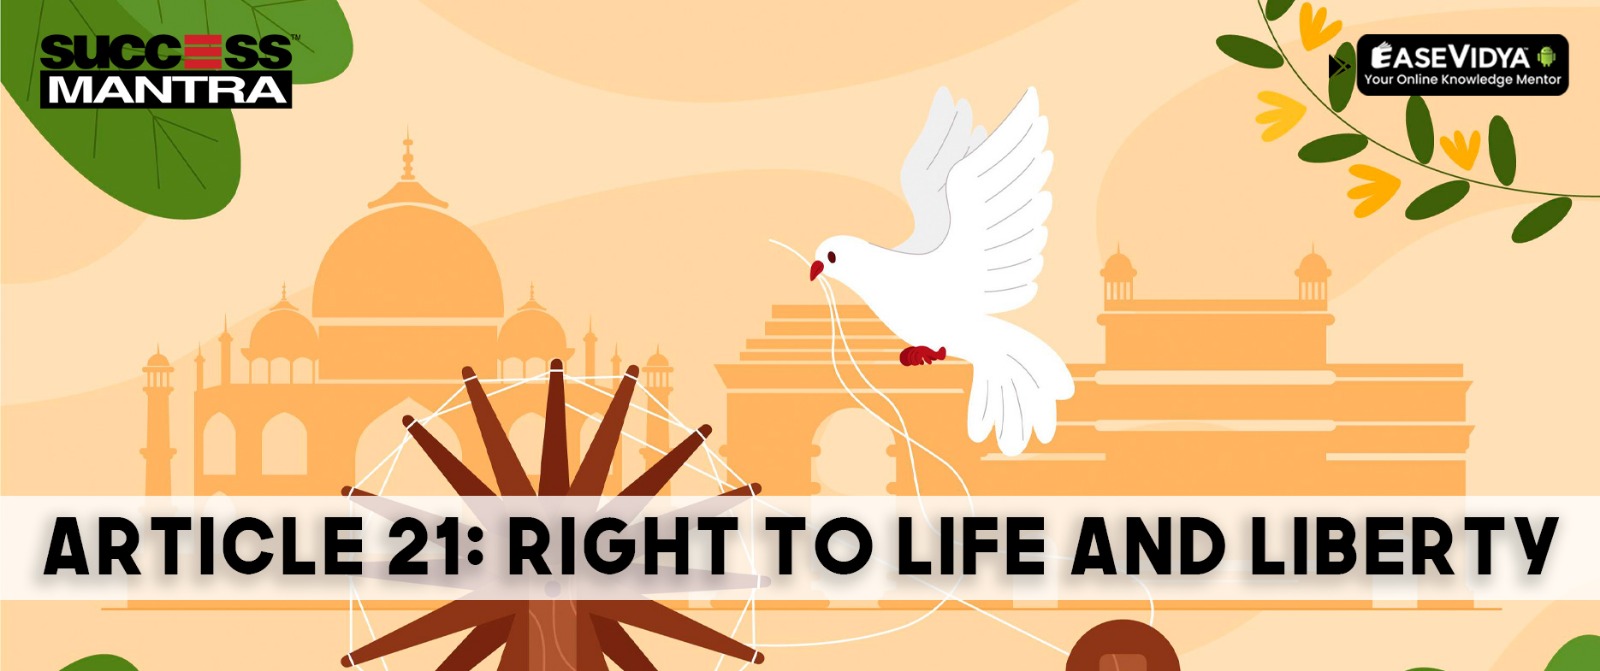 Article 21 - Right to Life and Liberty